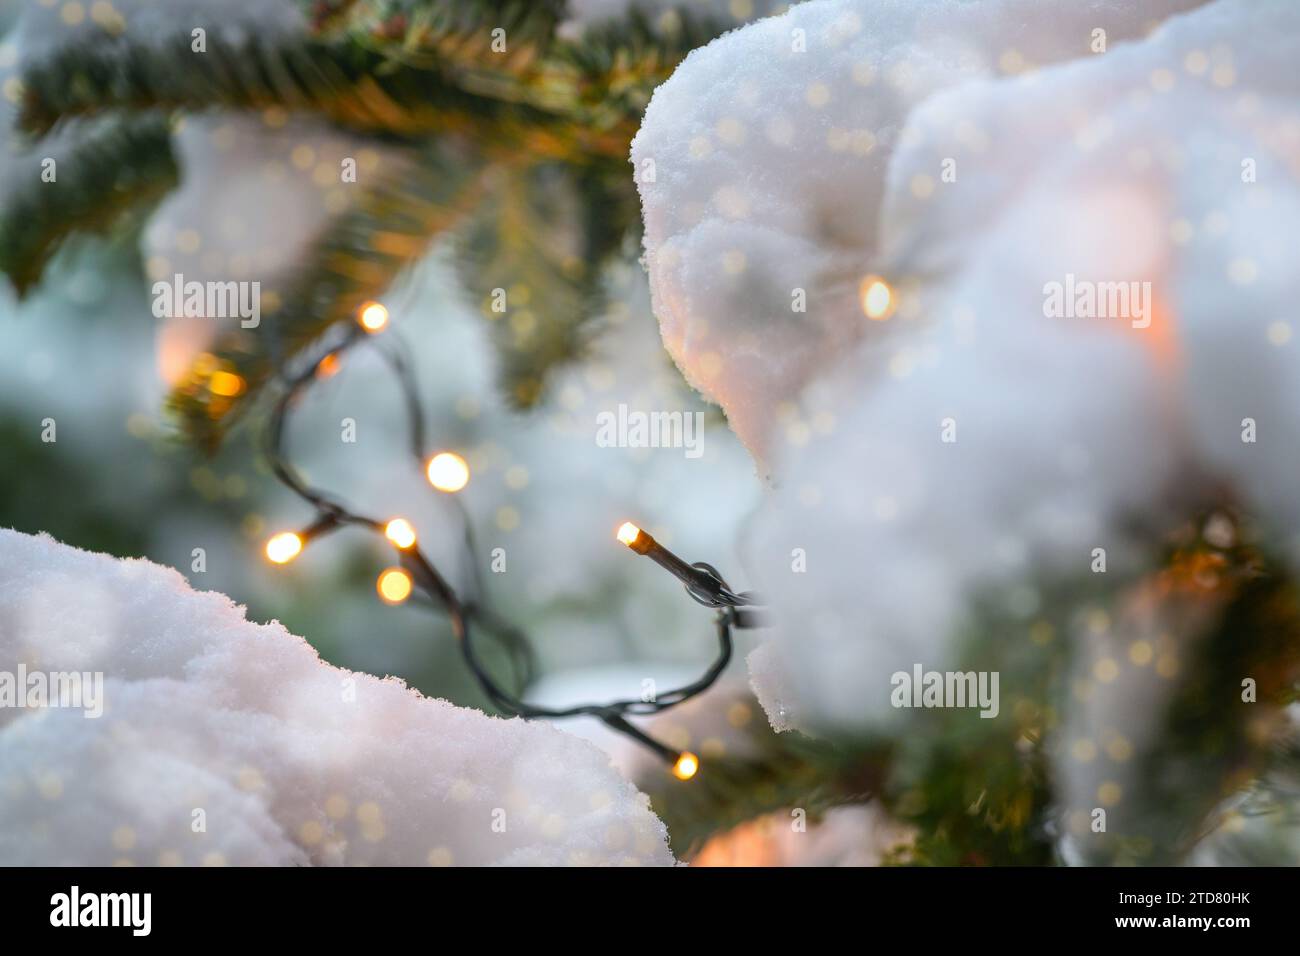 Fairy lights in a snow-covered Christmas tree in the winter garden or park, seasonal holiday decoration, copy space, selected focus, narrow depth of f Stock Photo